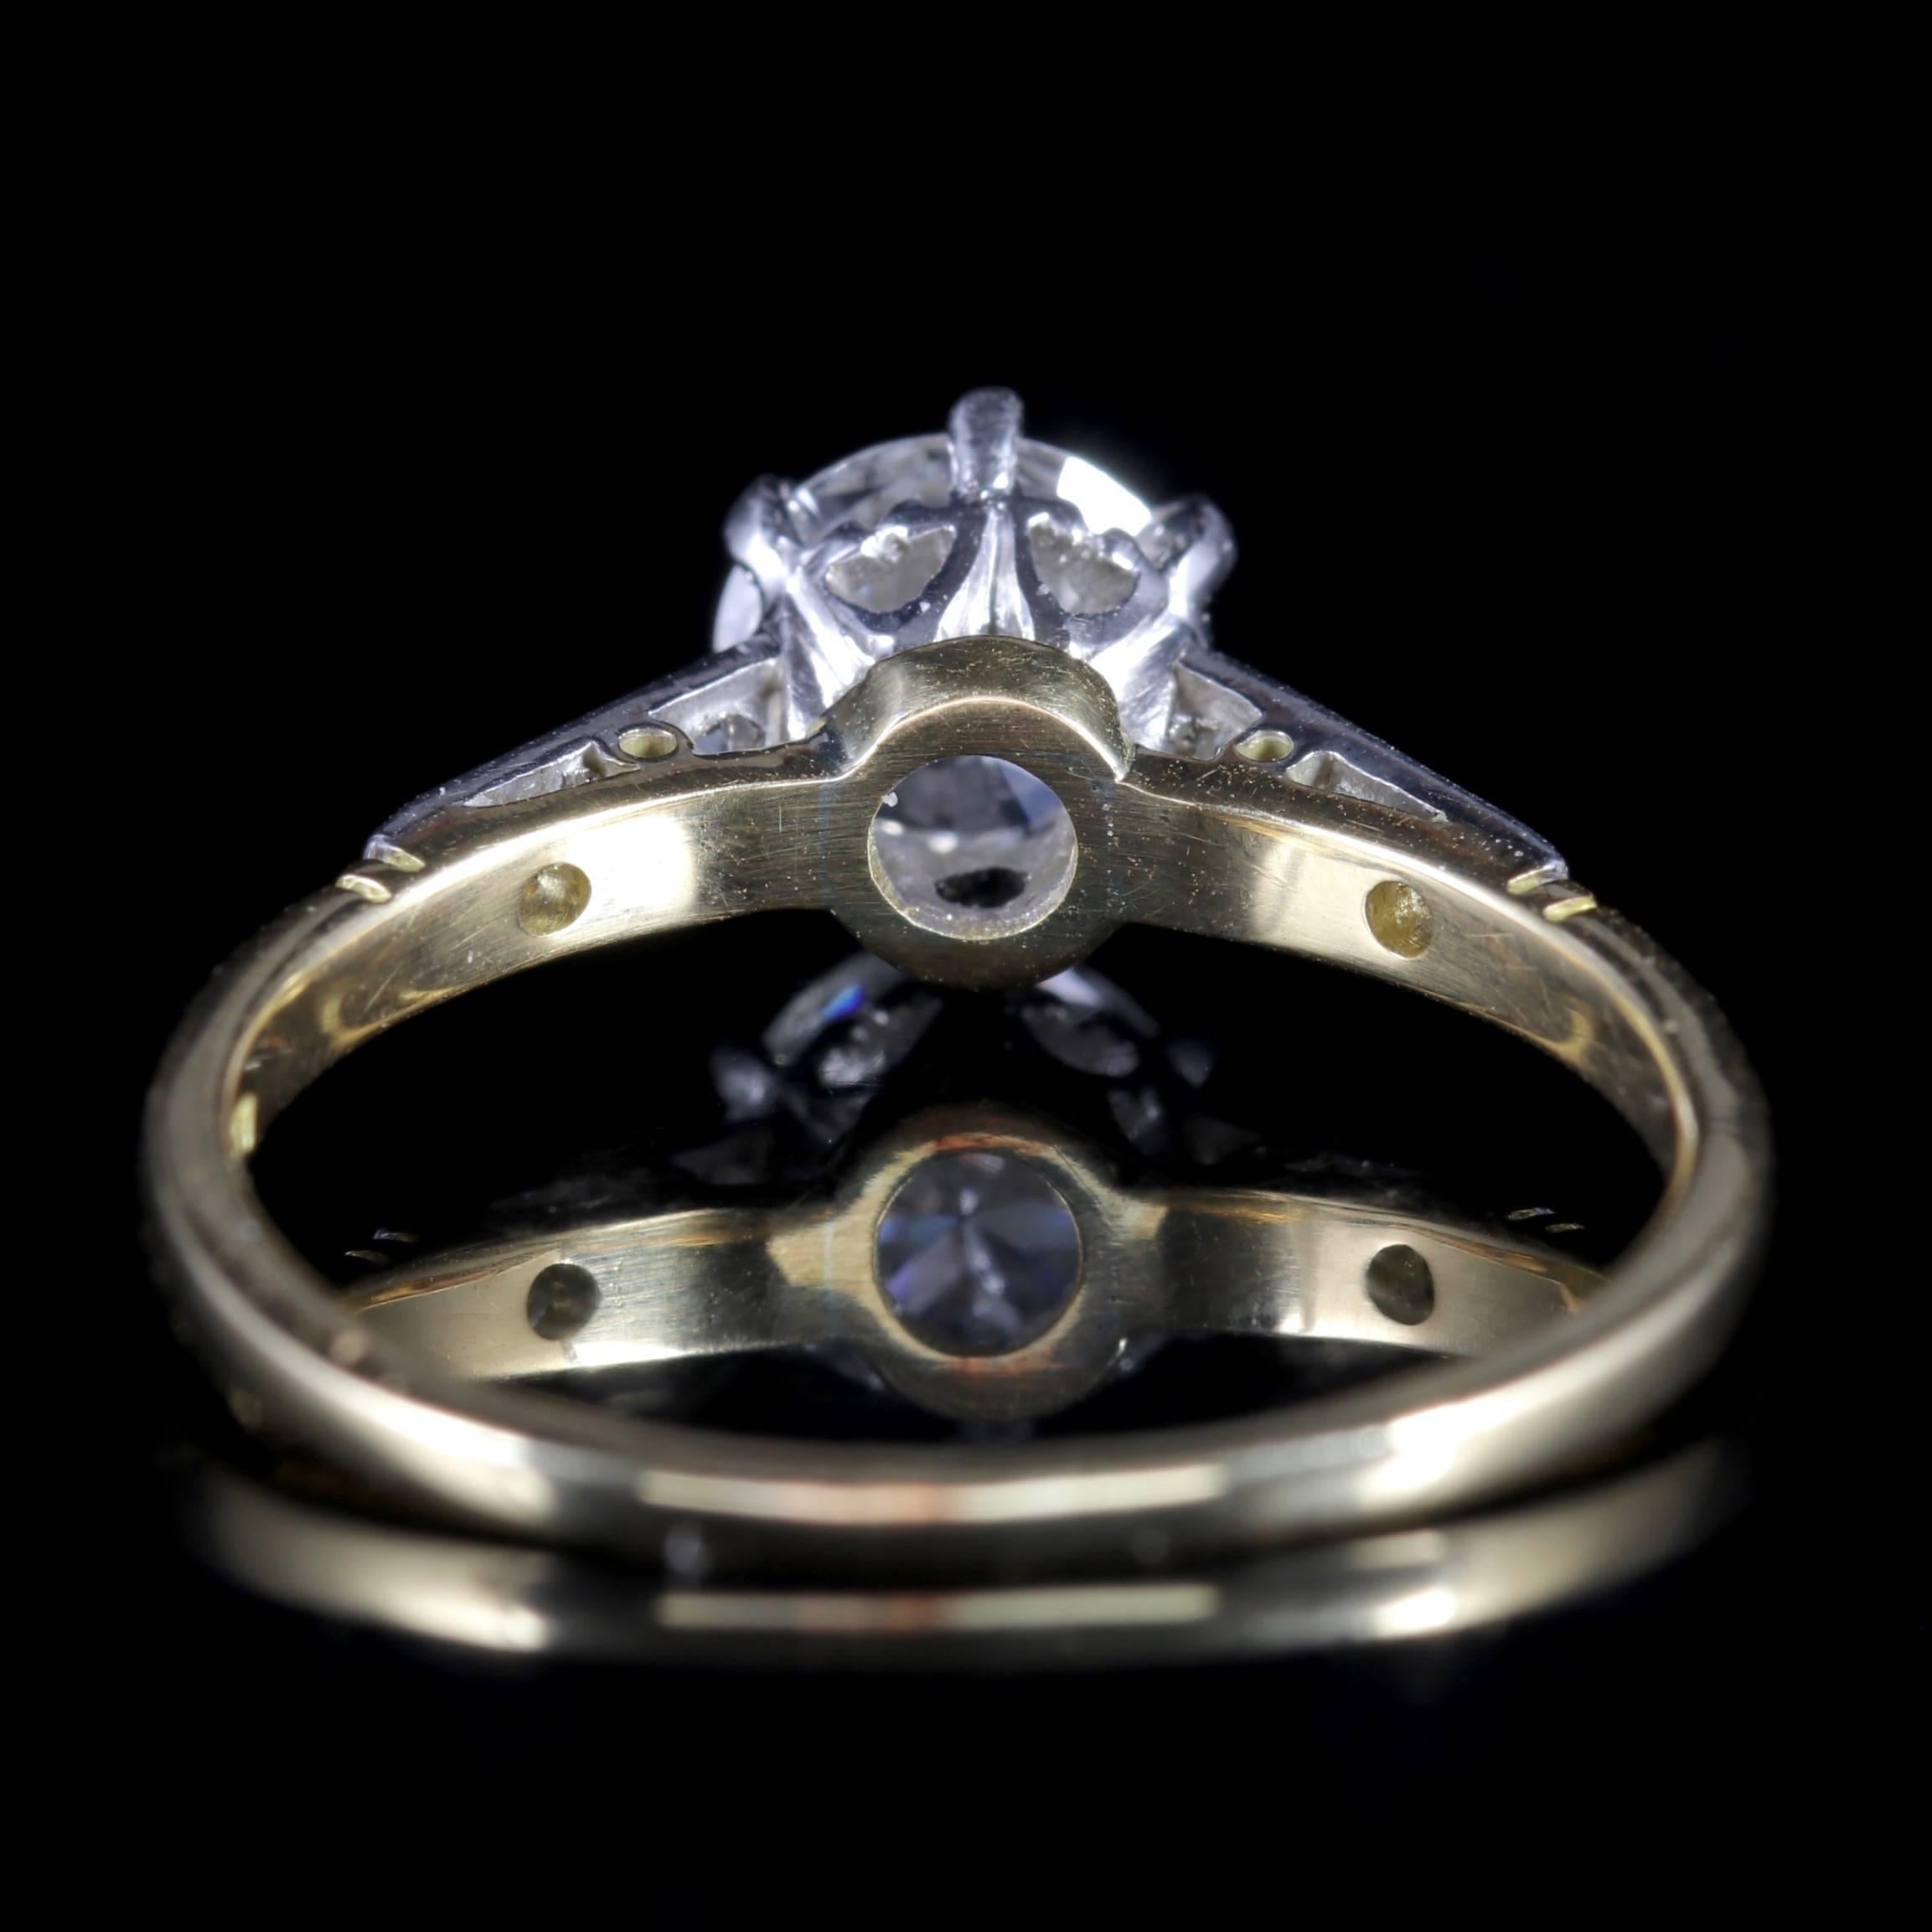 Antique Edwardian Diamond Solitaire Engagement Ring, circa 1915 In Excellent Condition For Sale In Lancaster, Lancashire